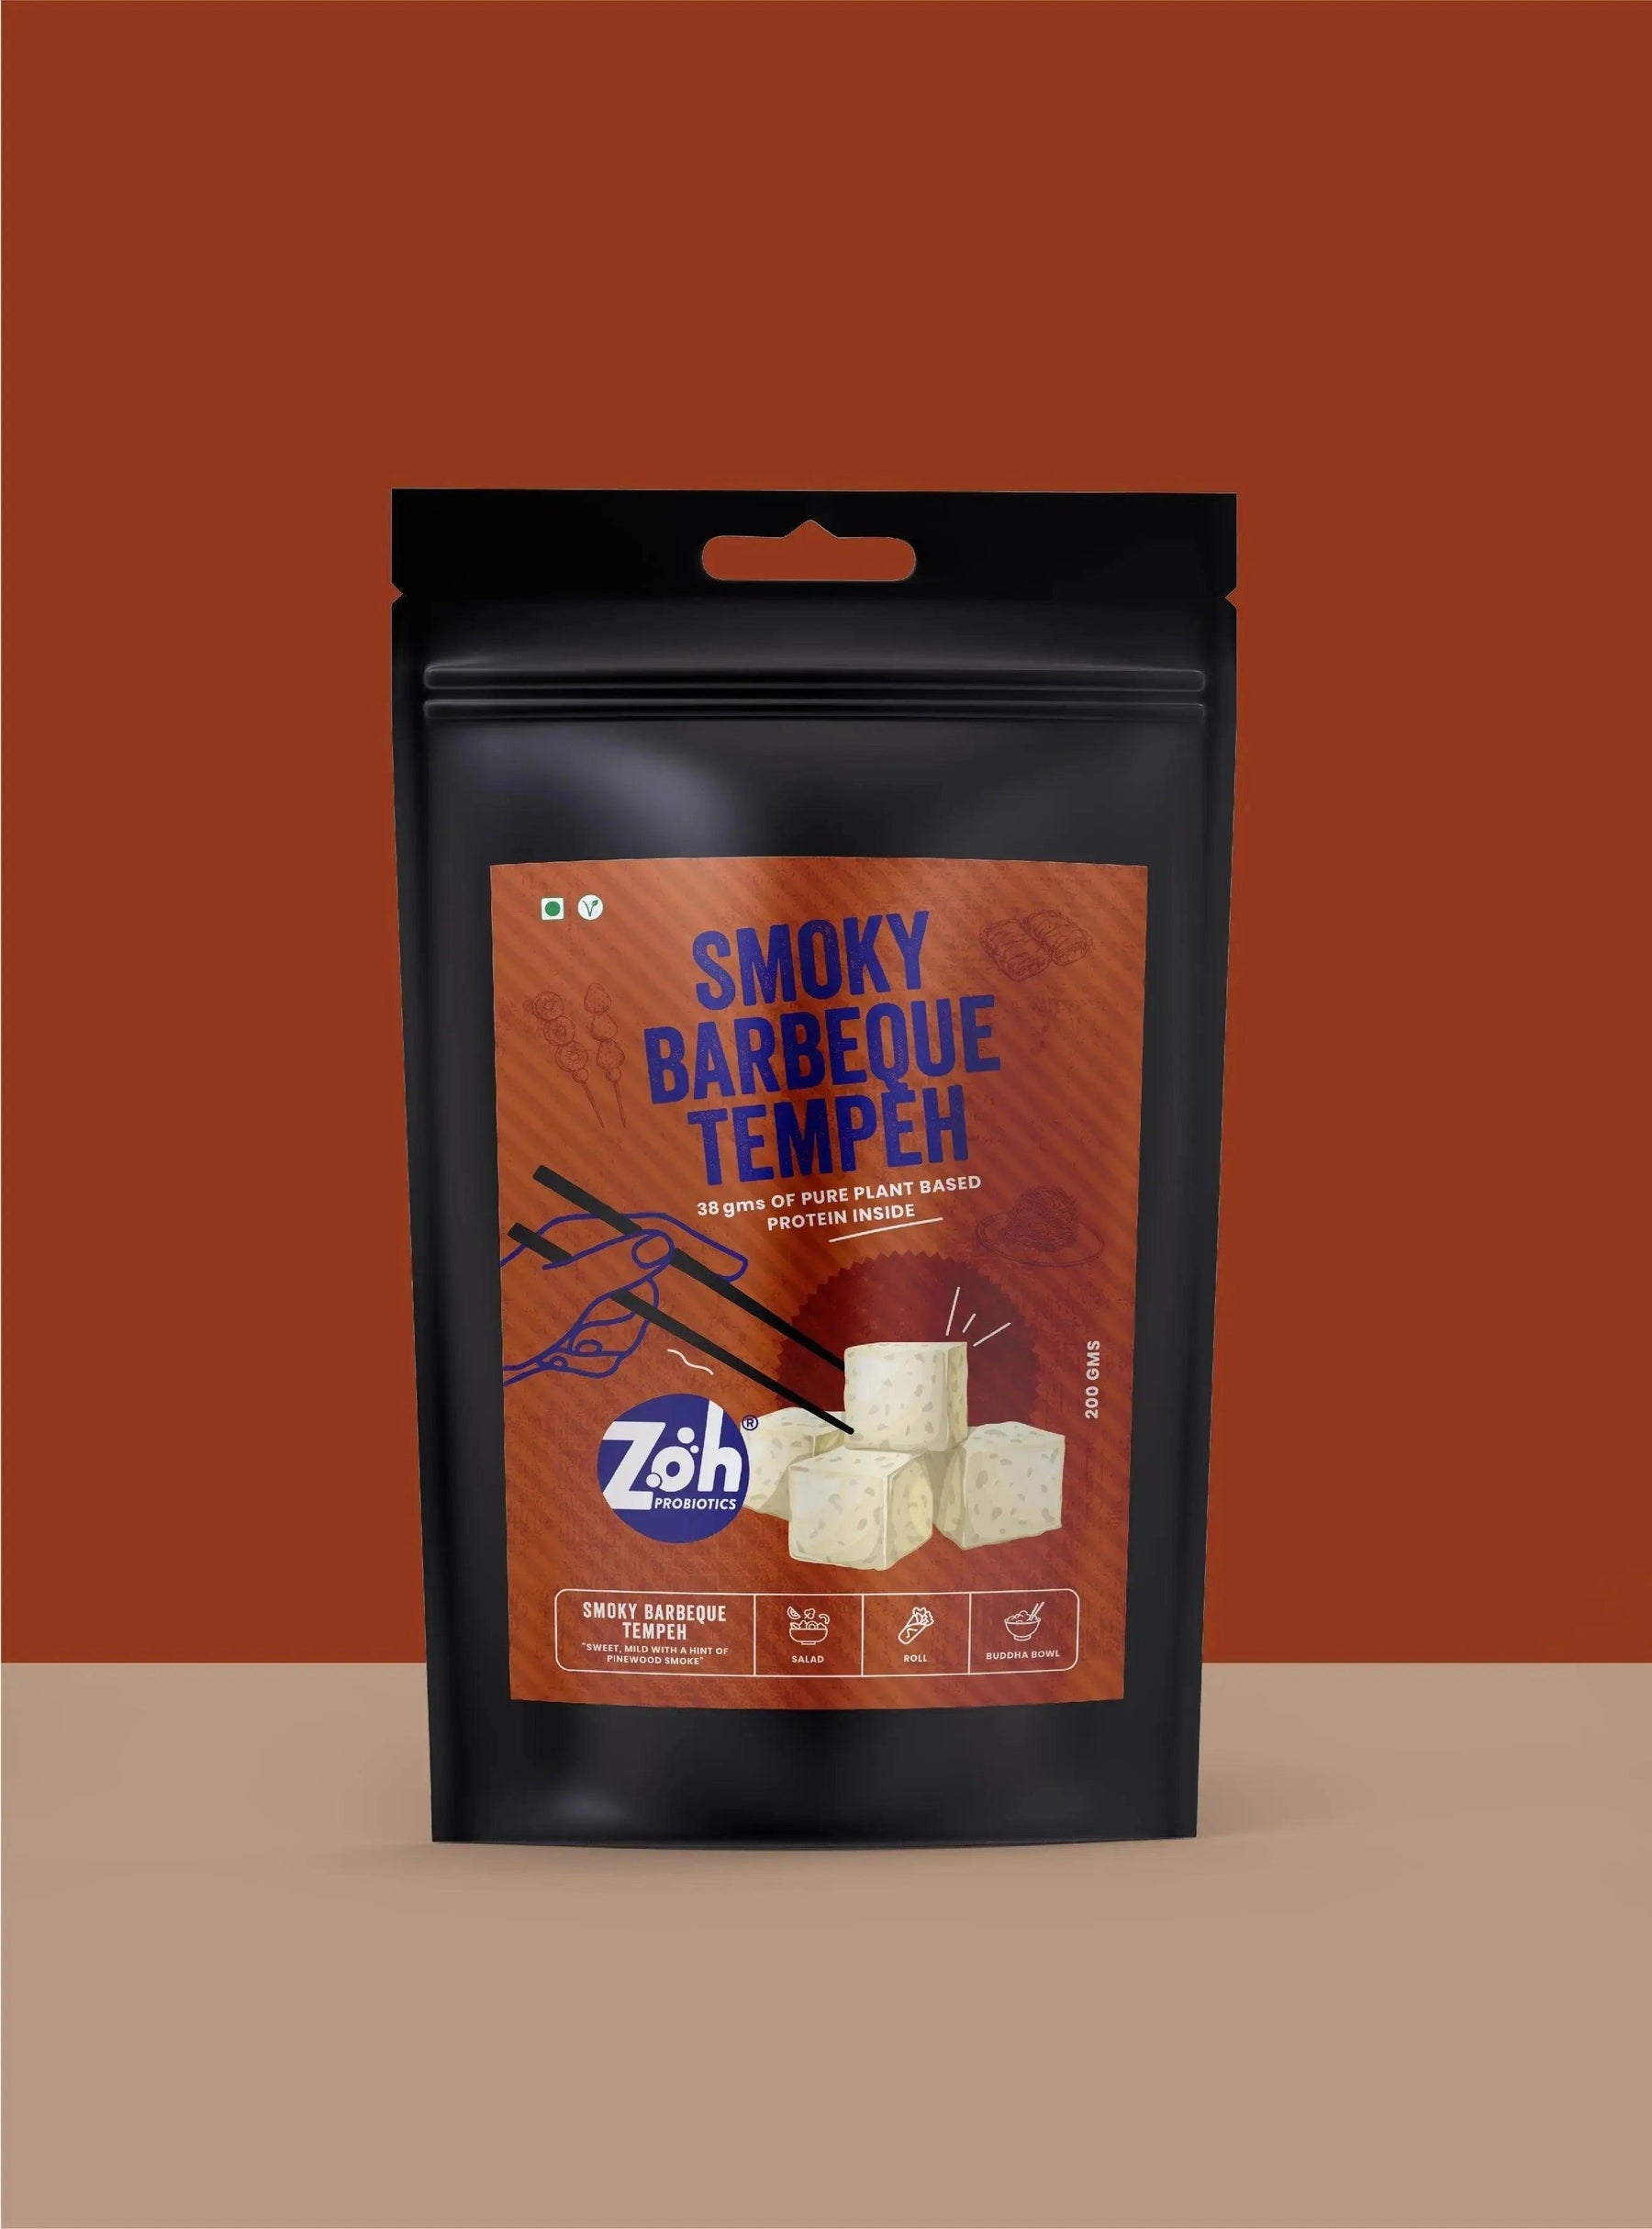 Bulk tempeh Mumbai: Coloured background mock-up of Zoh Smoky Barbeque front packaging